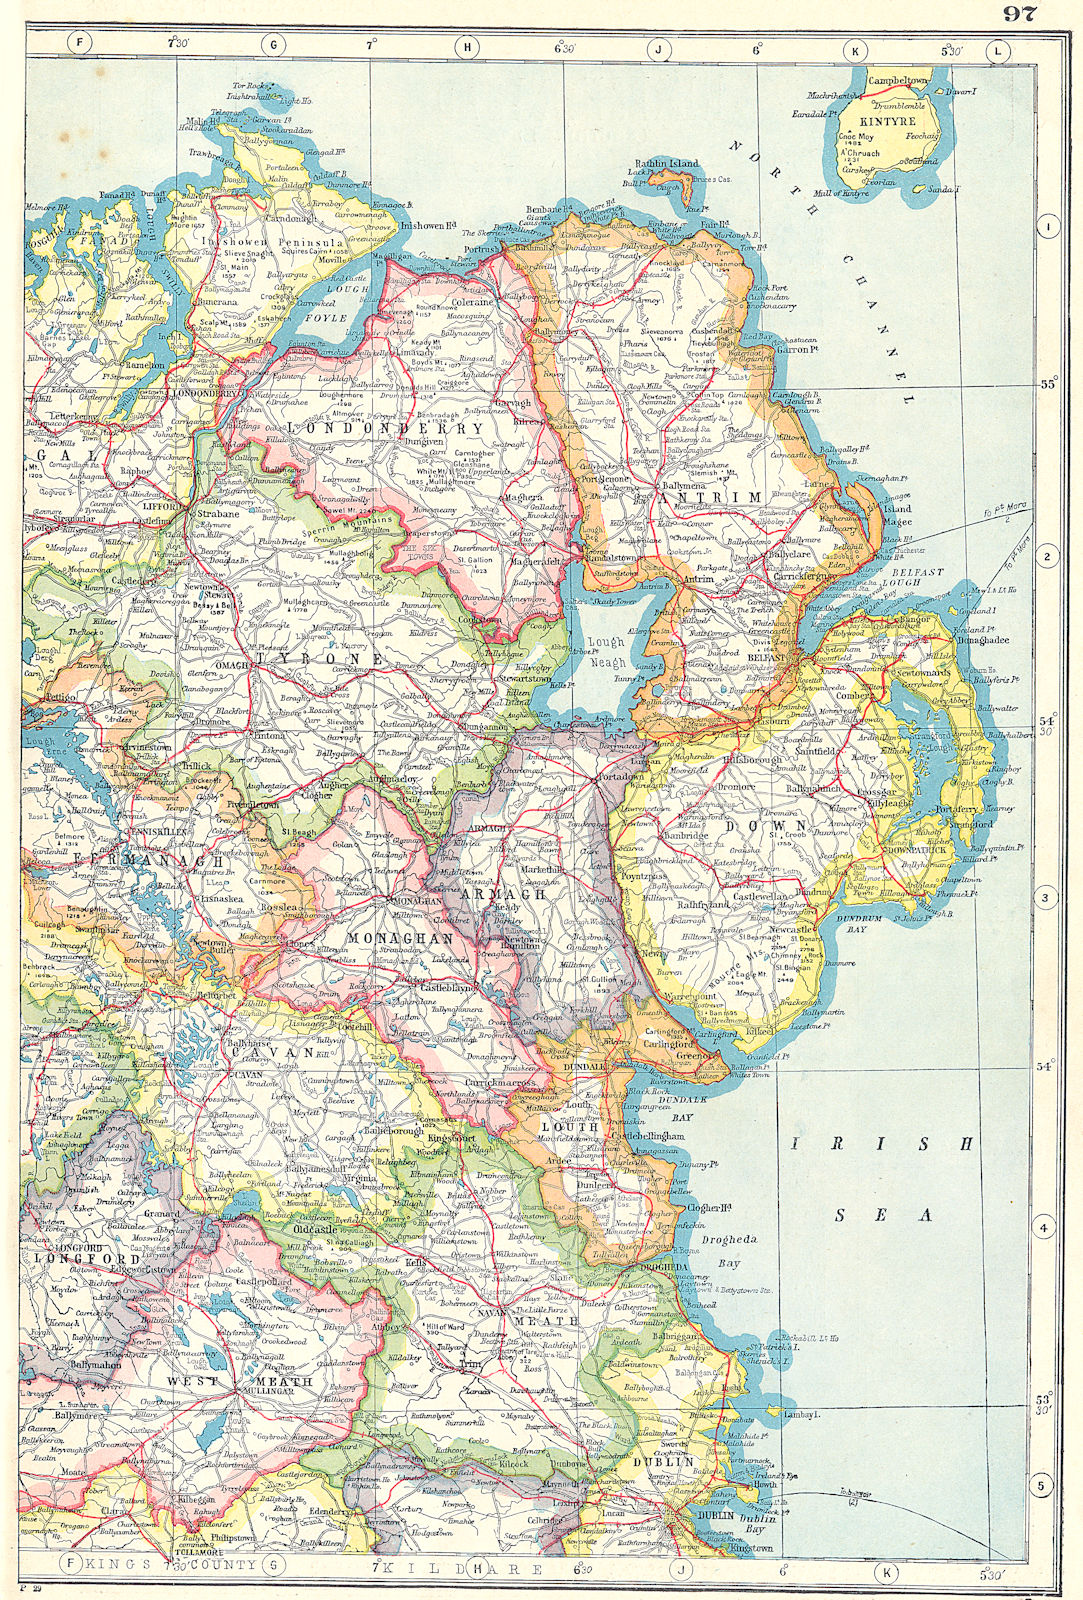 IRELAND NORTH EAST. Ulster Antrim Down Londonderry Tyrone Armagh etc 1920 map